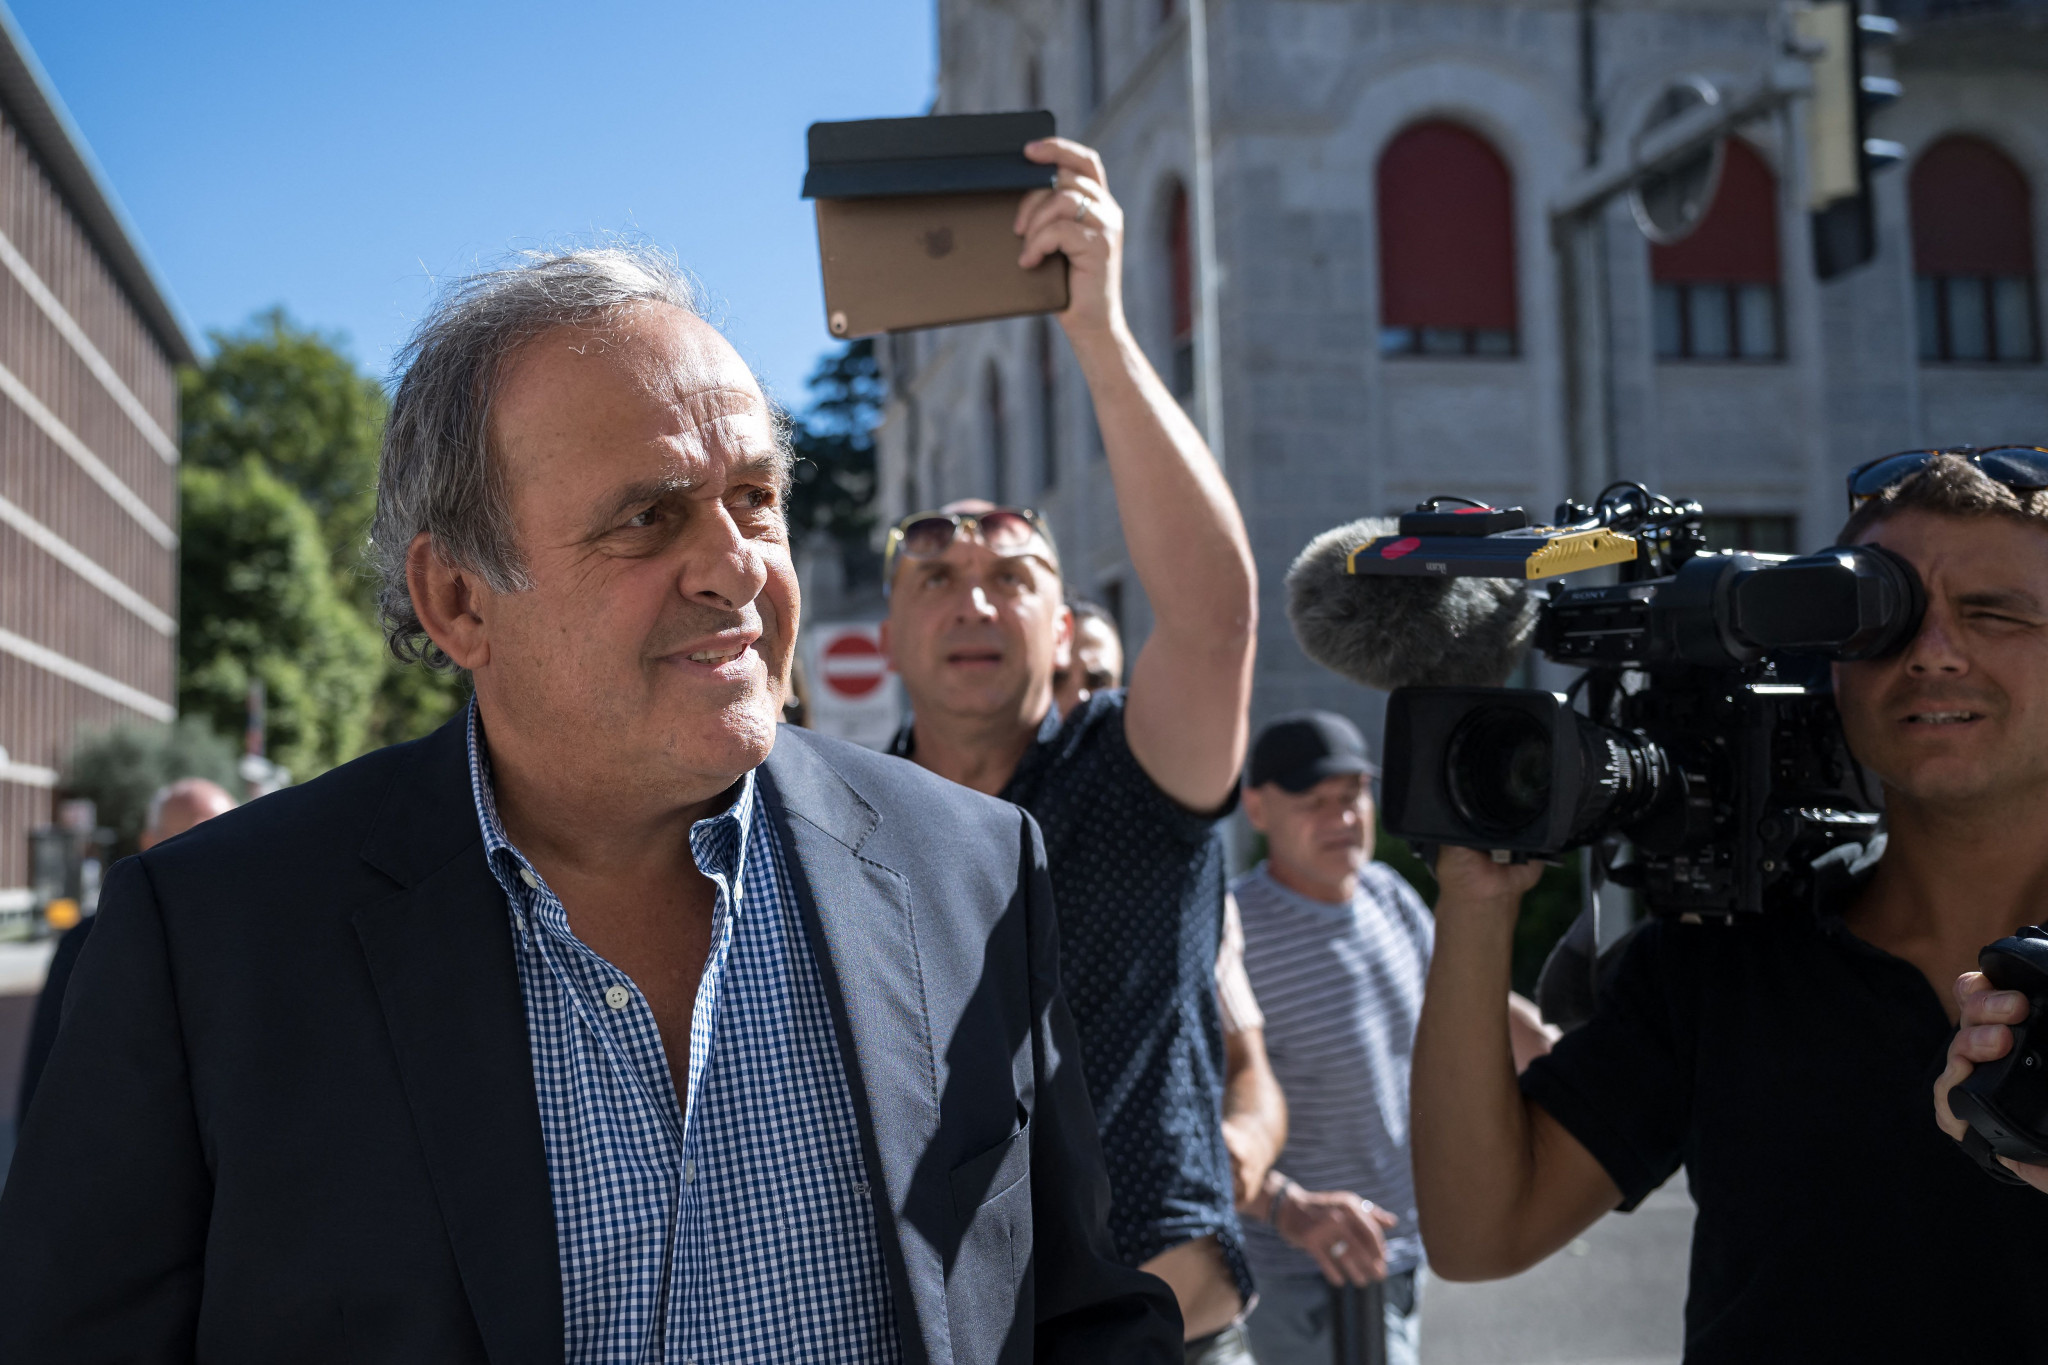 Michel Platini has suggested that he will go after those who led the case against him in his 